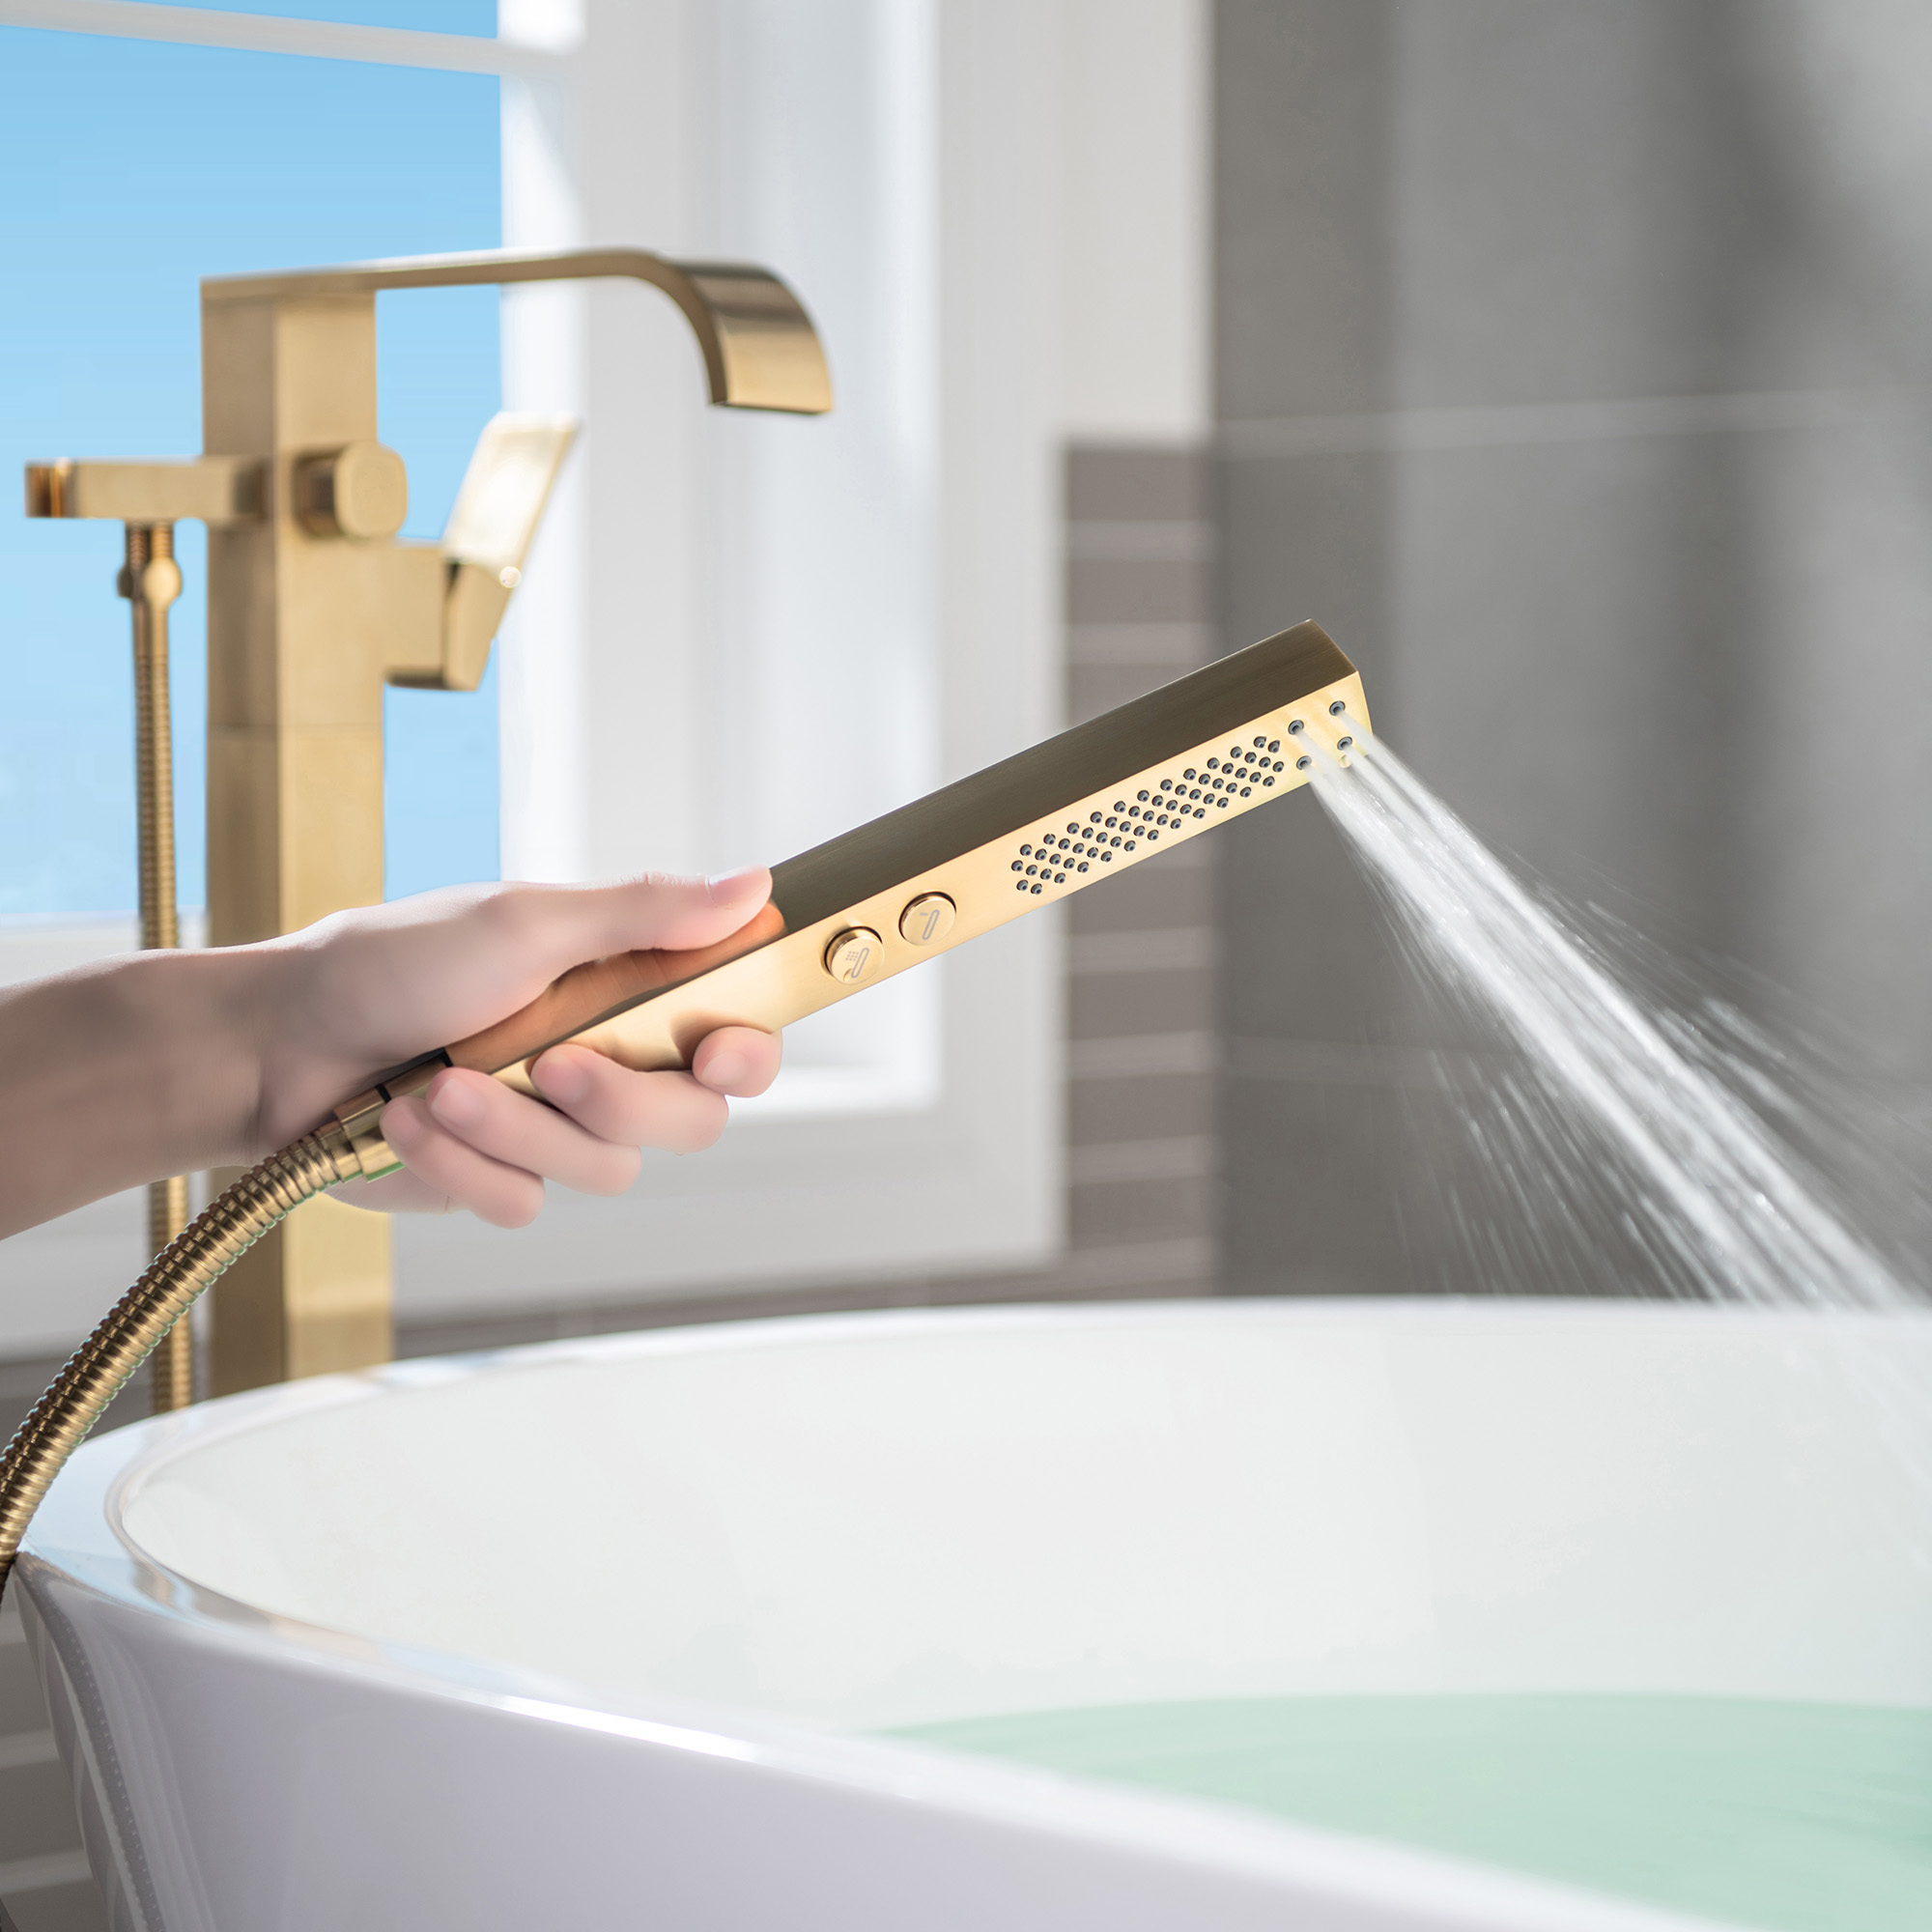  WOODBRIDGE F0039BG Contemporary Single Handle Floor Mount Freestanding Tub Filler Faucet with Hand shower in Brushed Gold Finish._12213